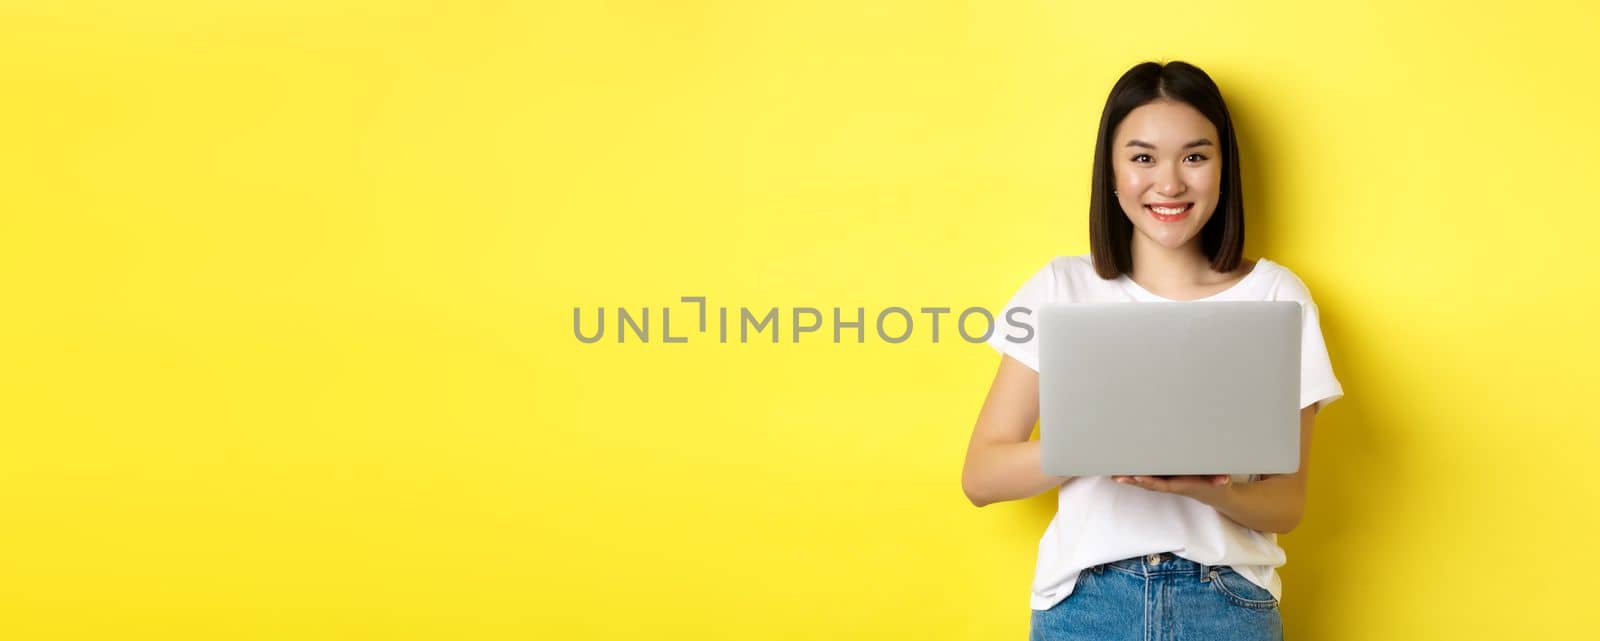 Cute asian woman studying on laptop and smiling, standing in white t-shirt and jeans against yellow background by Benzoix